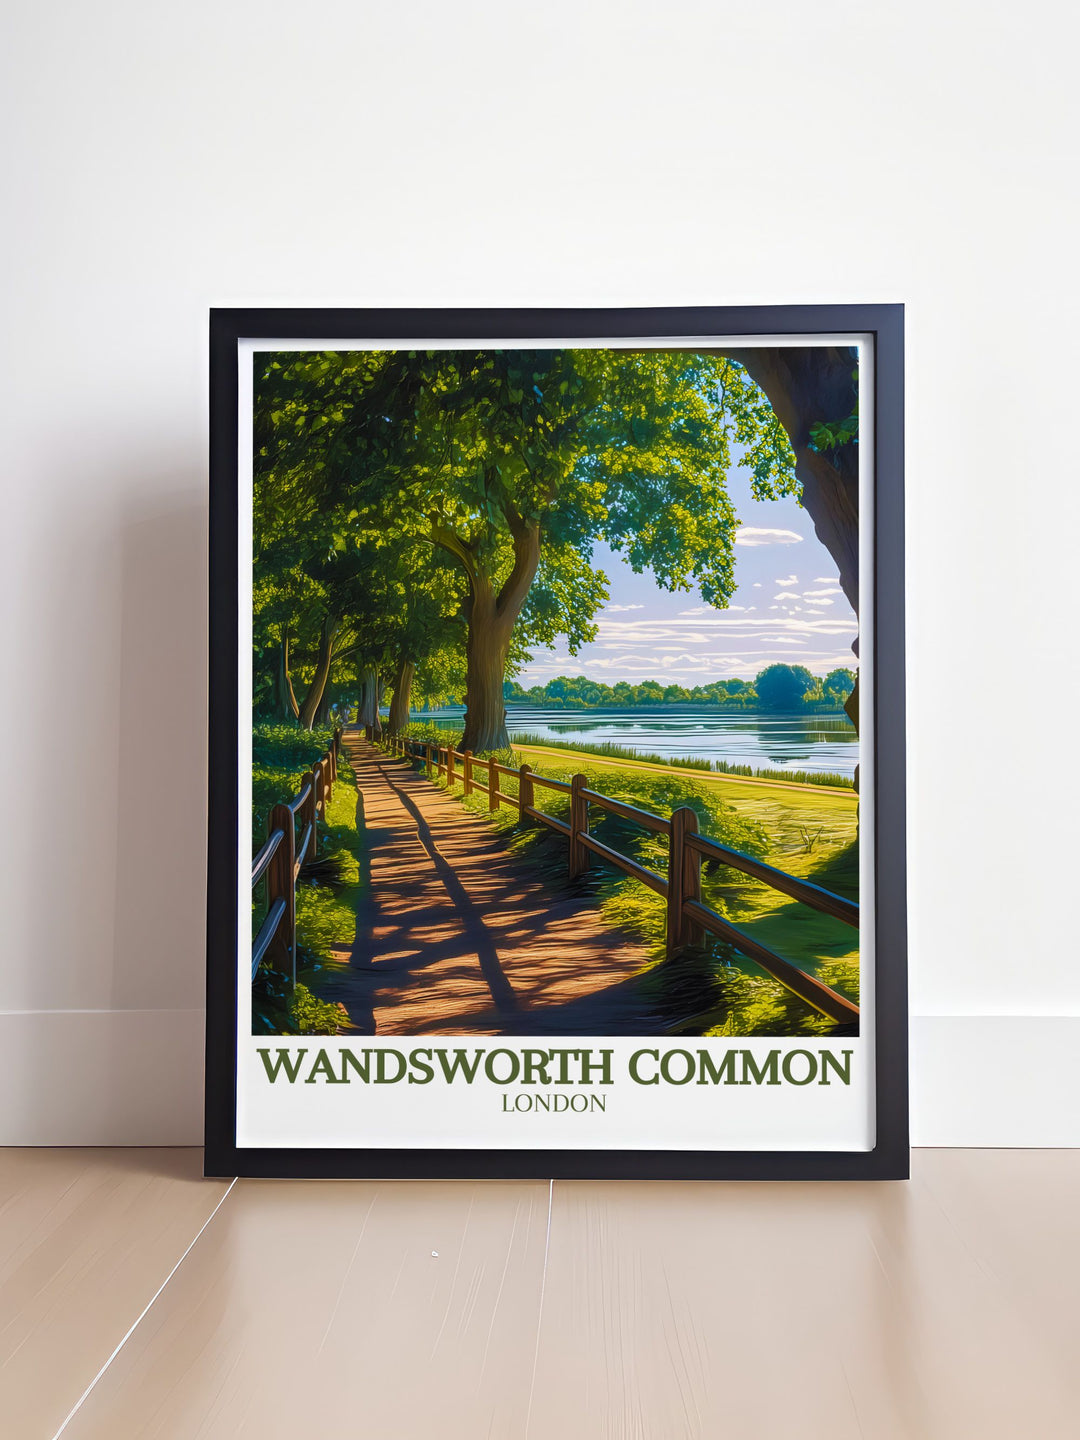 Decorate your space with this elegant Wandsworth Common poster. Featuring detailed illustrations of the Wandsworth Windmill and Wandsworth Pond, this South London poster brings the charm of Wandsworth Park into your home.